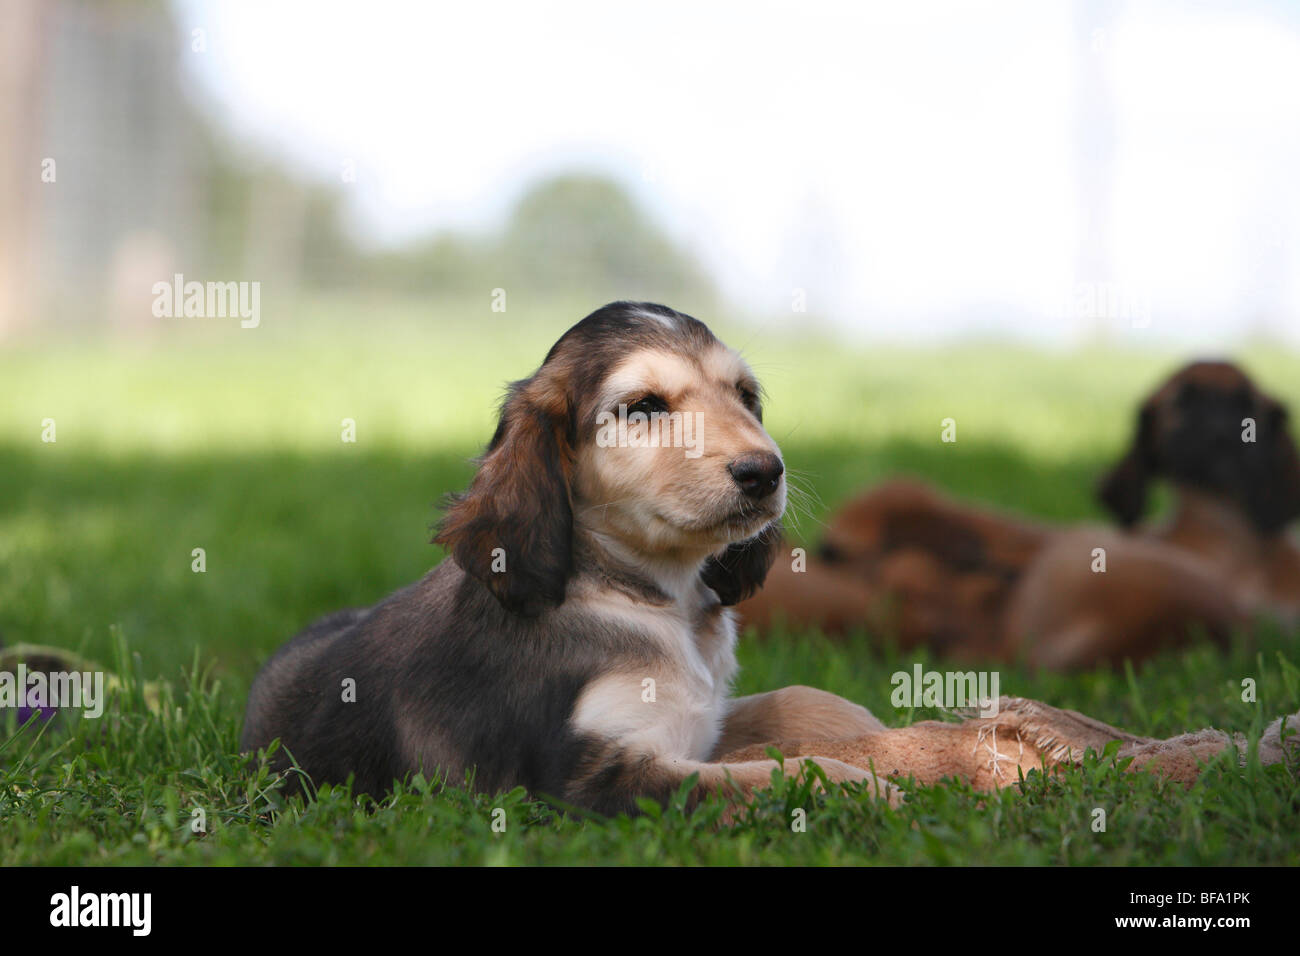 Afghanistan Hound, Afghan Hound (Canis lupus f. familiaris), puppy lying in grass in the shadow, Germany Stock Photo